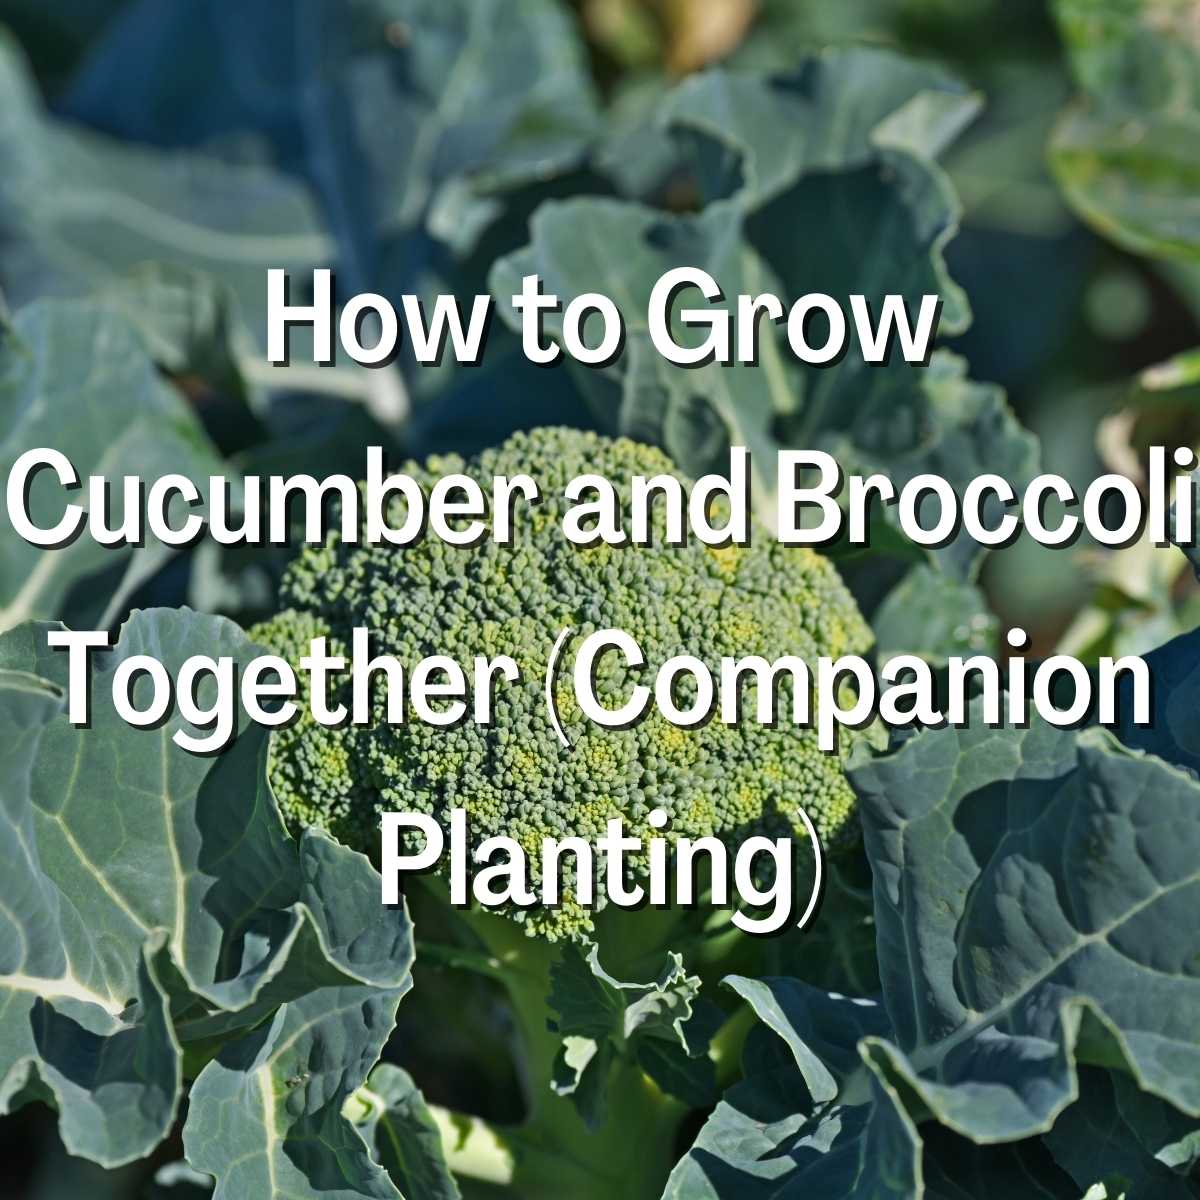 How to Grow Cucumber and Broccoli Together